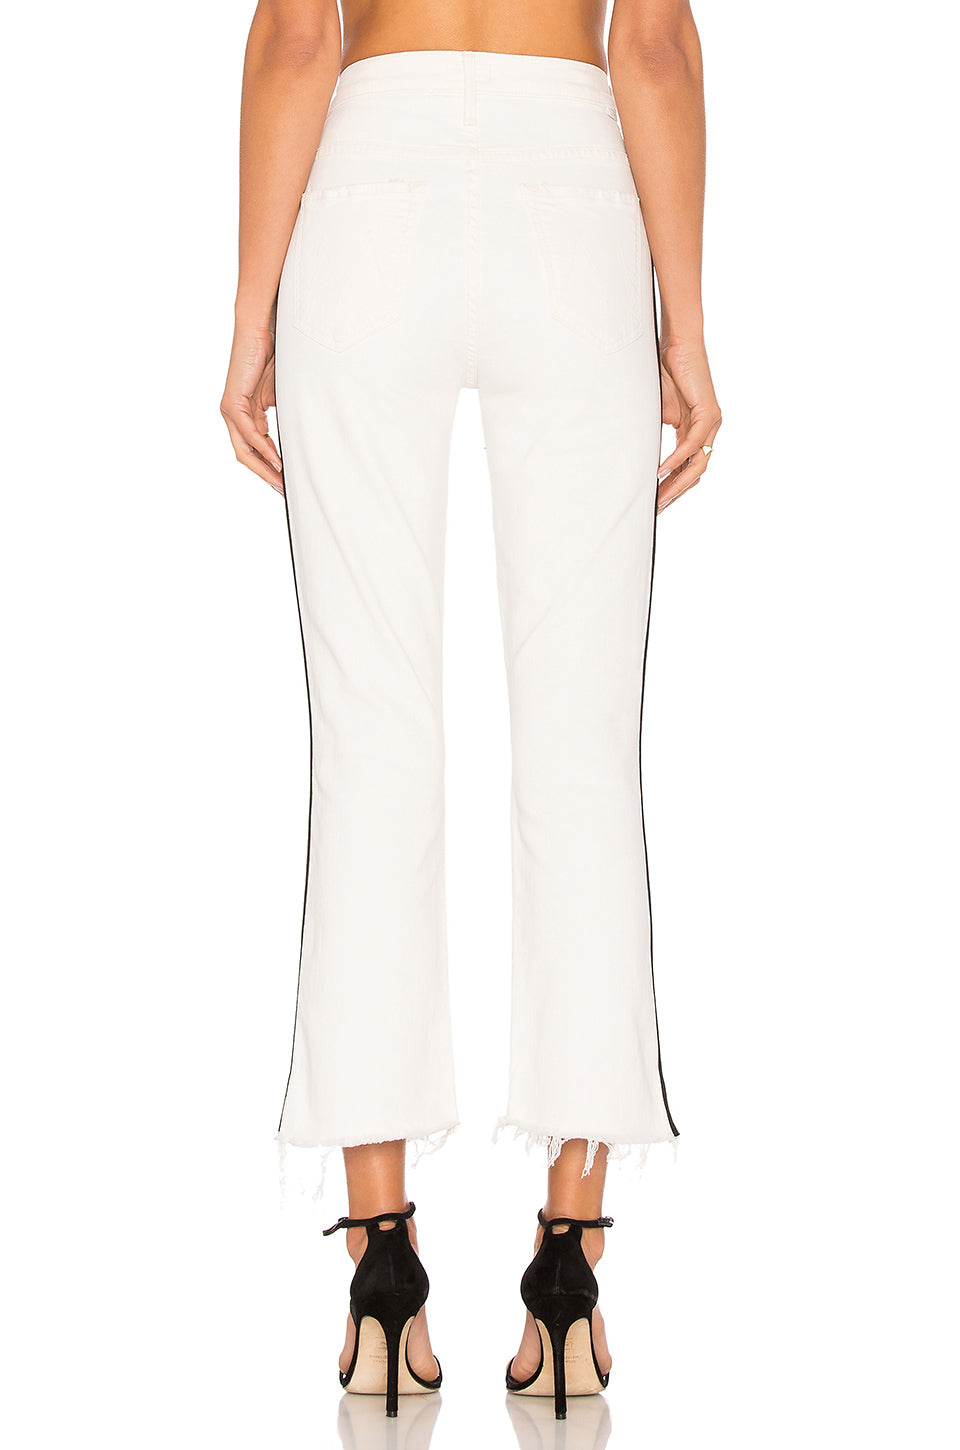 Mother Jeans Womens The Inside Crop Step Fray in WIR-Whipping The Racer